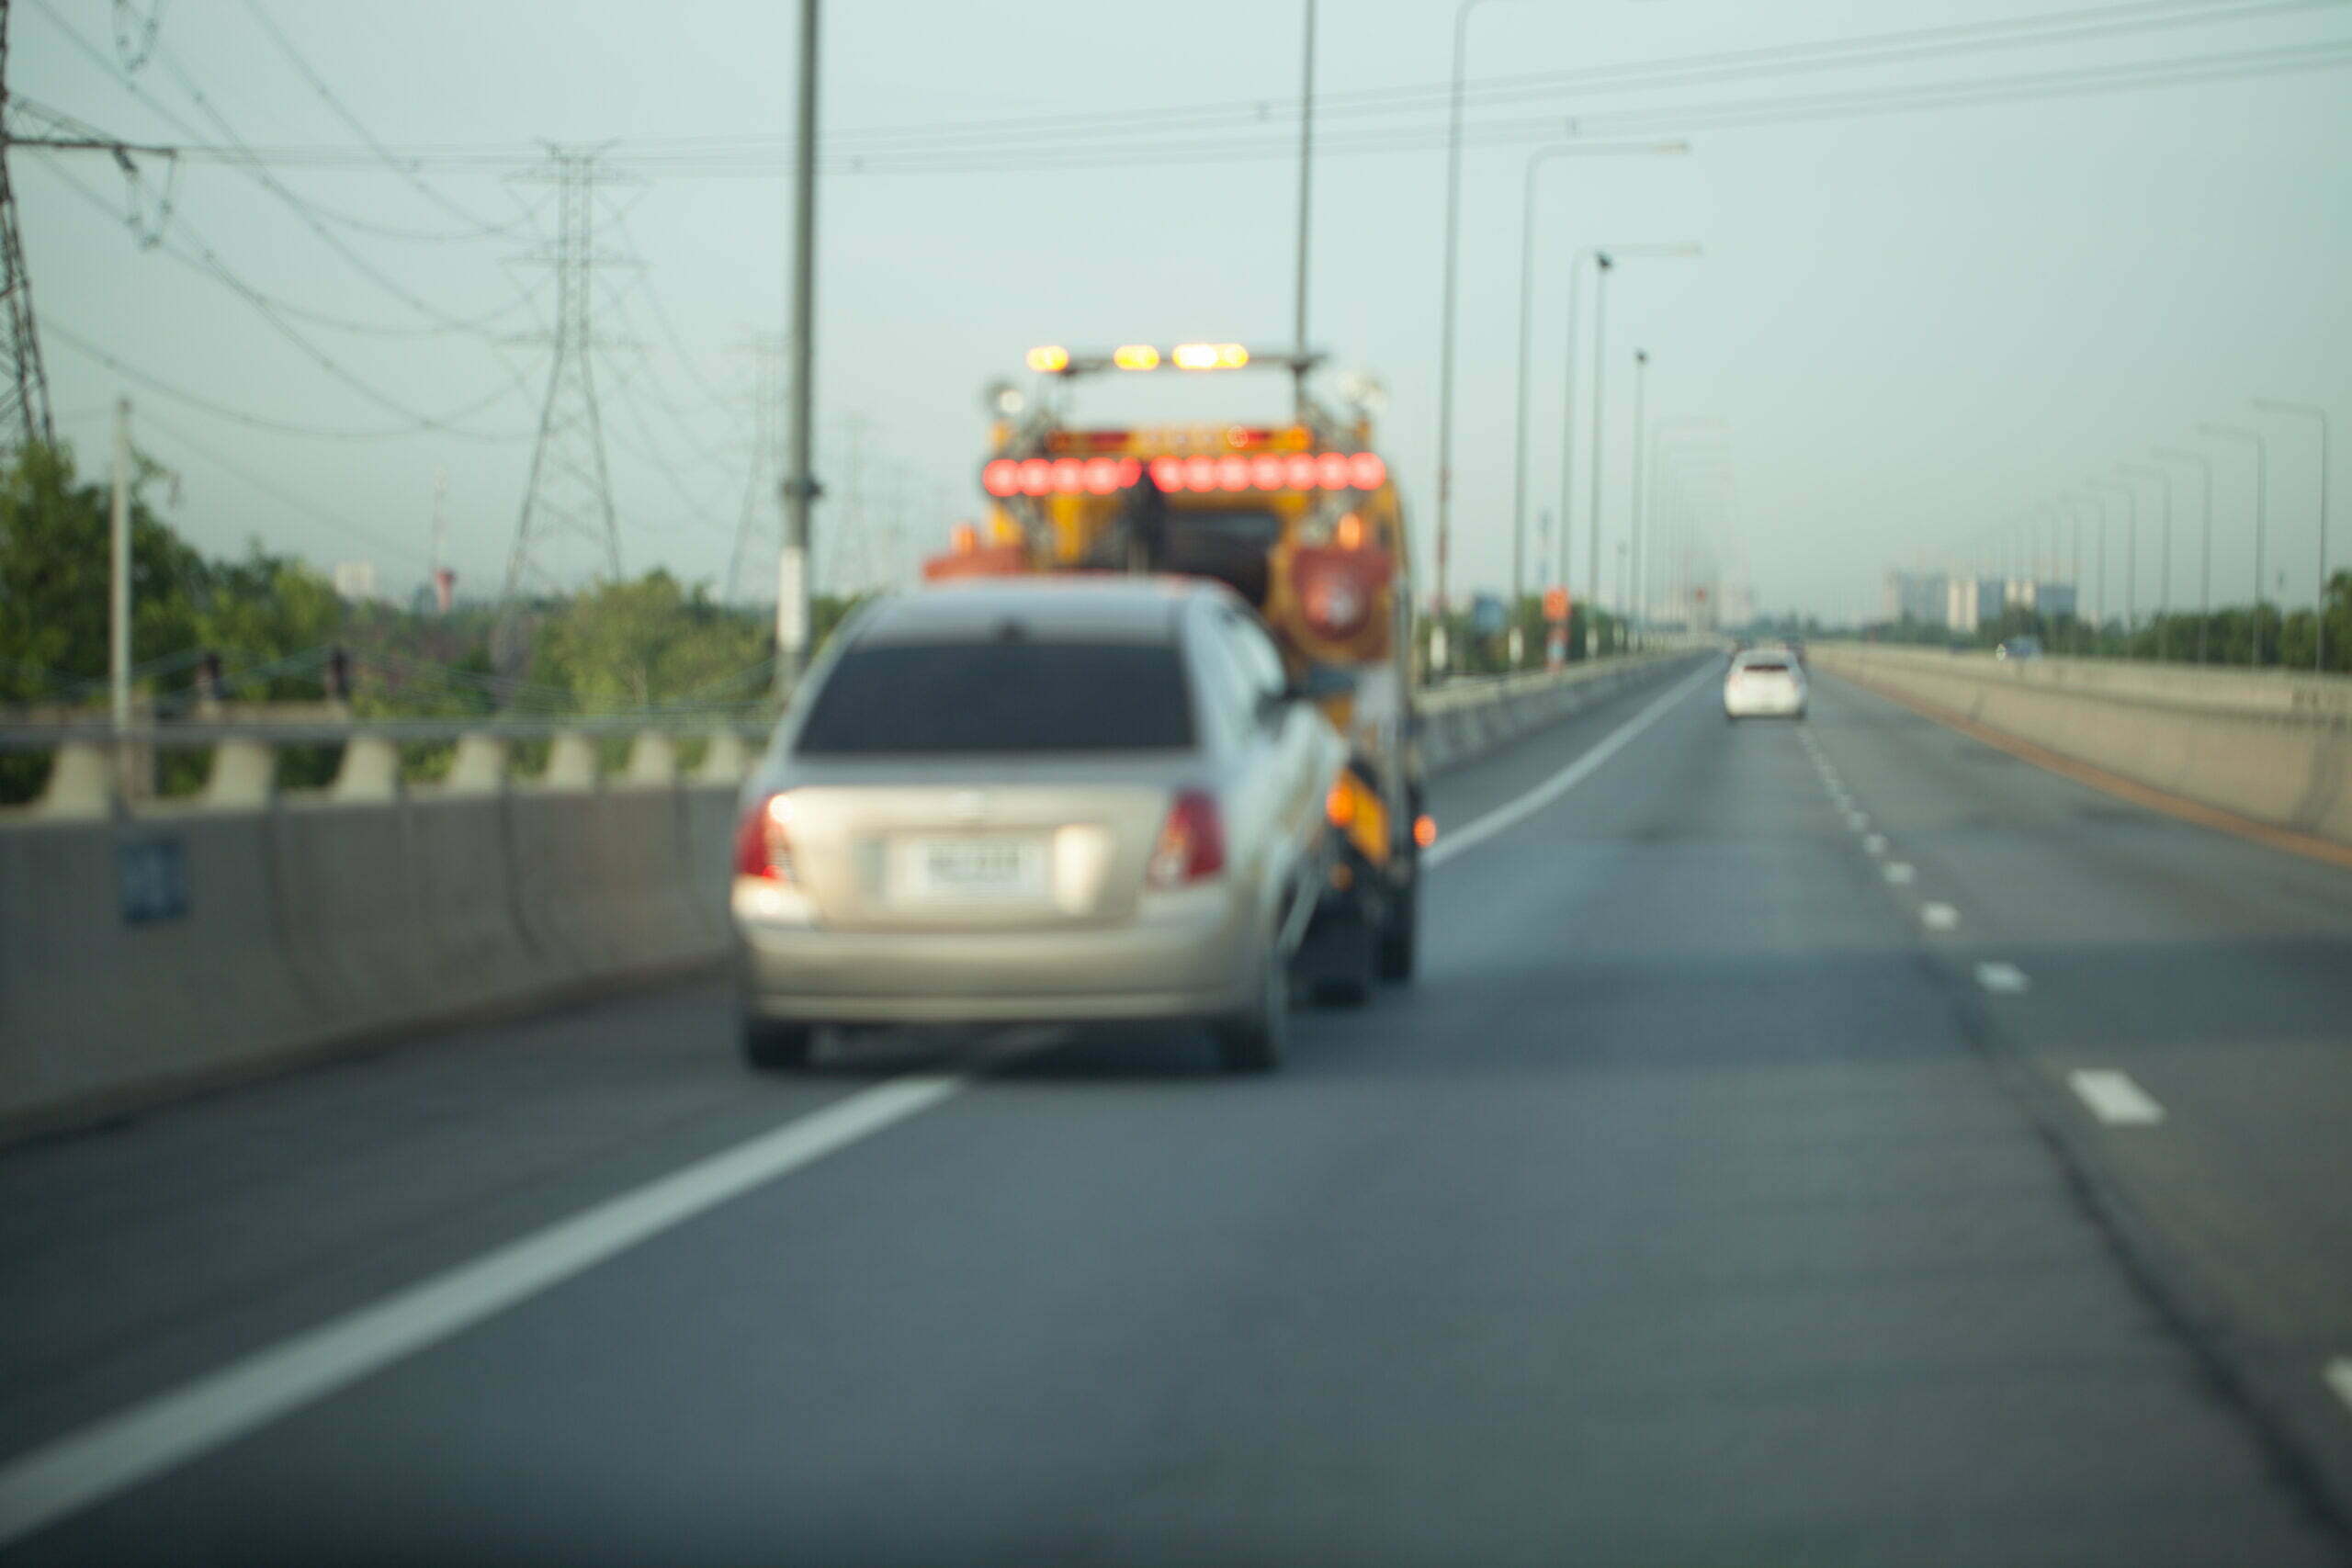 towing safety for highway tows